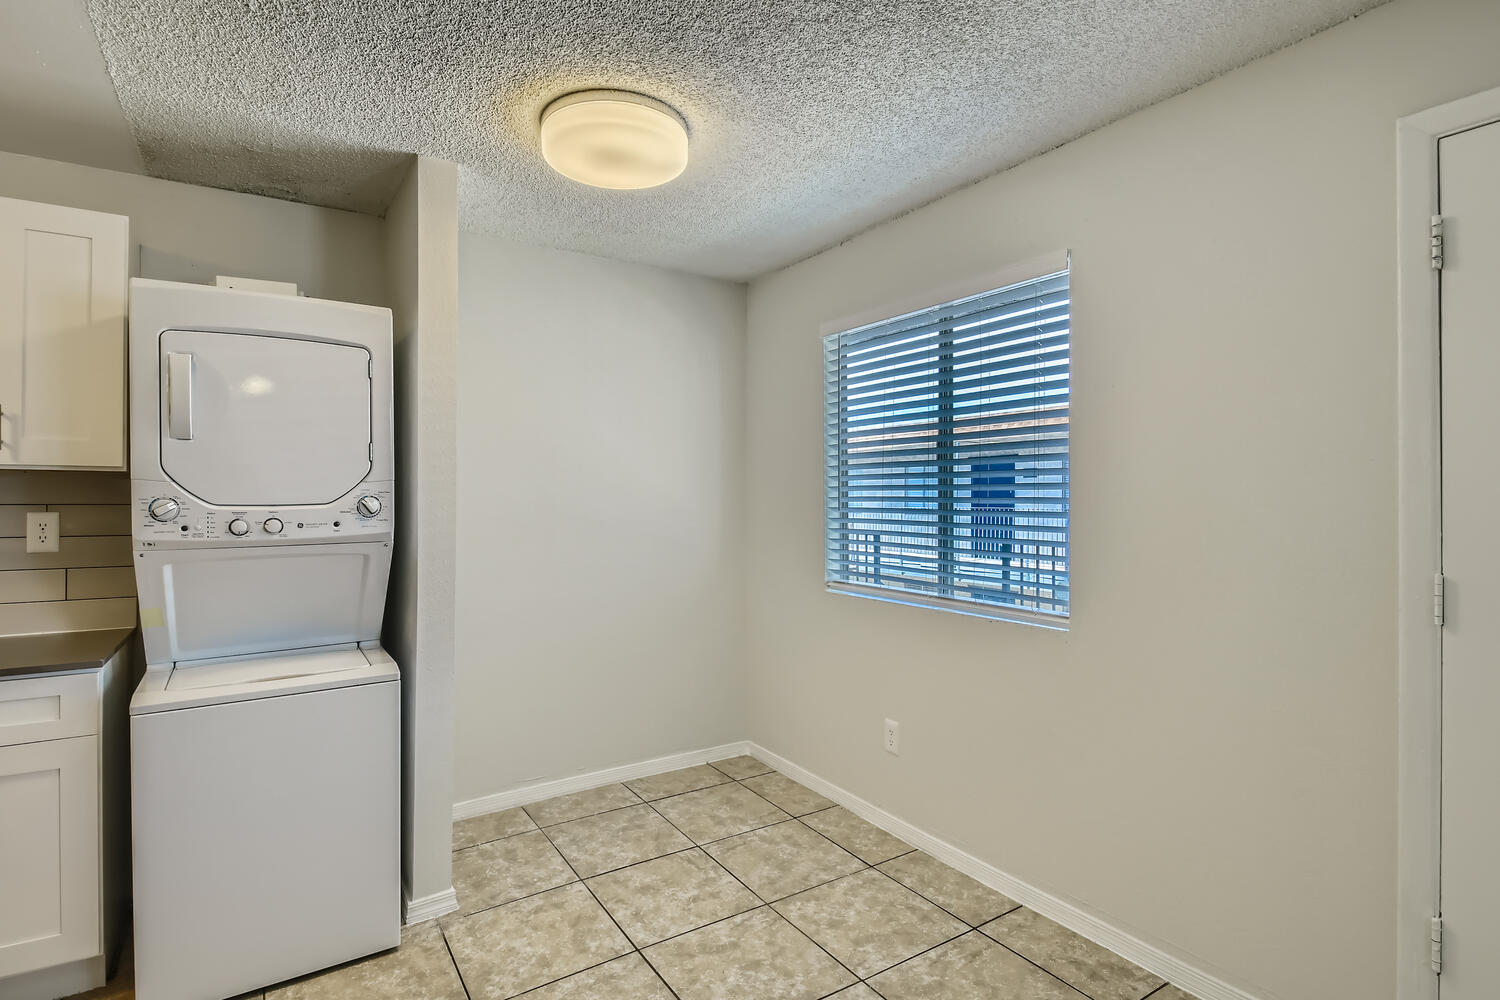 A room near the kitchen with a washer and dryer at Rise at the Palms.